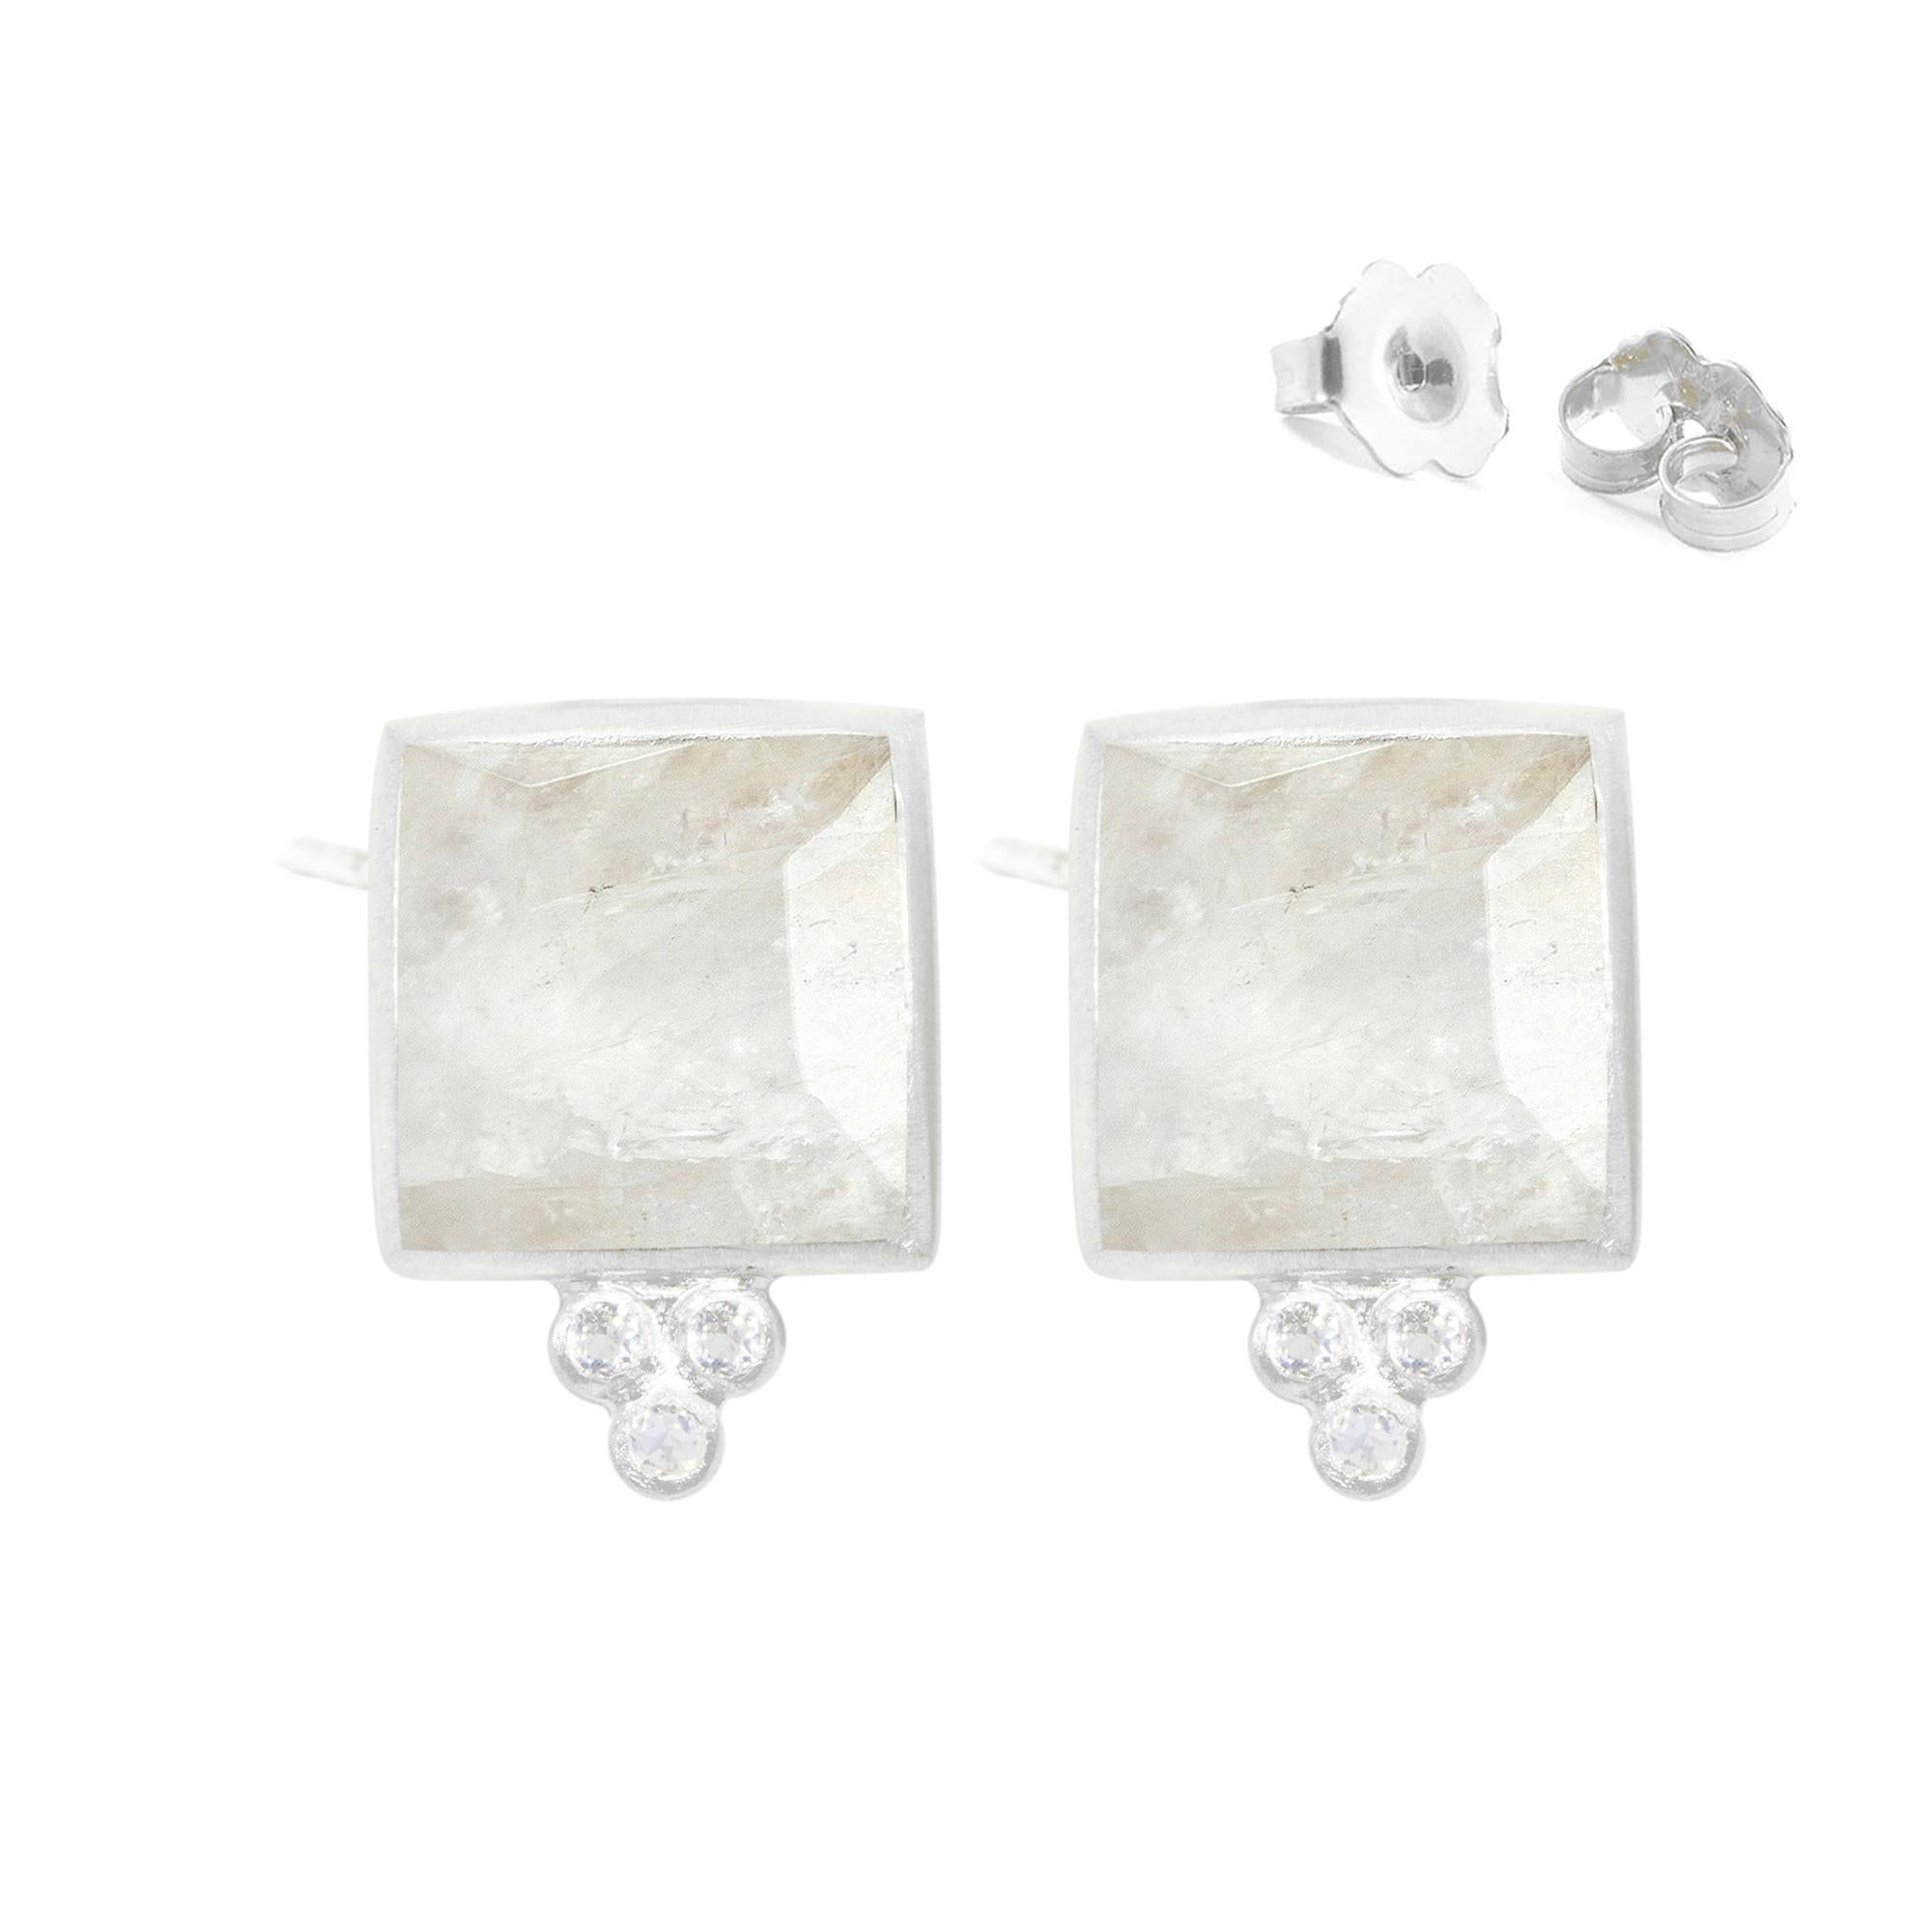 Square dance: Designed with hand-faceted moonstone framed in a textured oxidized, the Ariana Oxidized Studs go with everything in your closet.
Nina Nguyen Design's patent-pending earrings have an element on the back of the stud or charm to allow